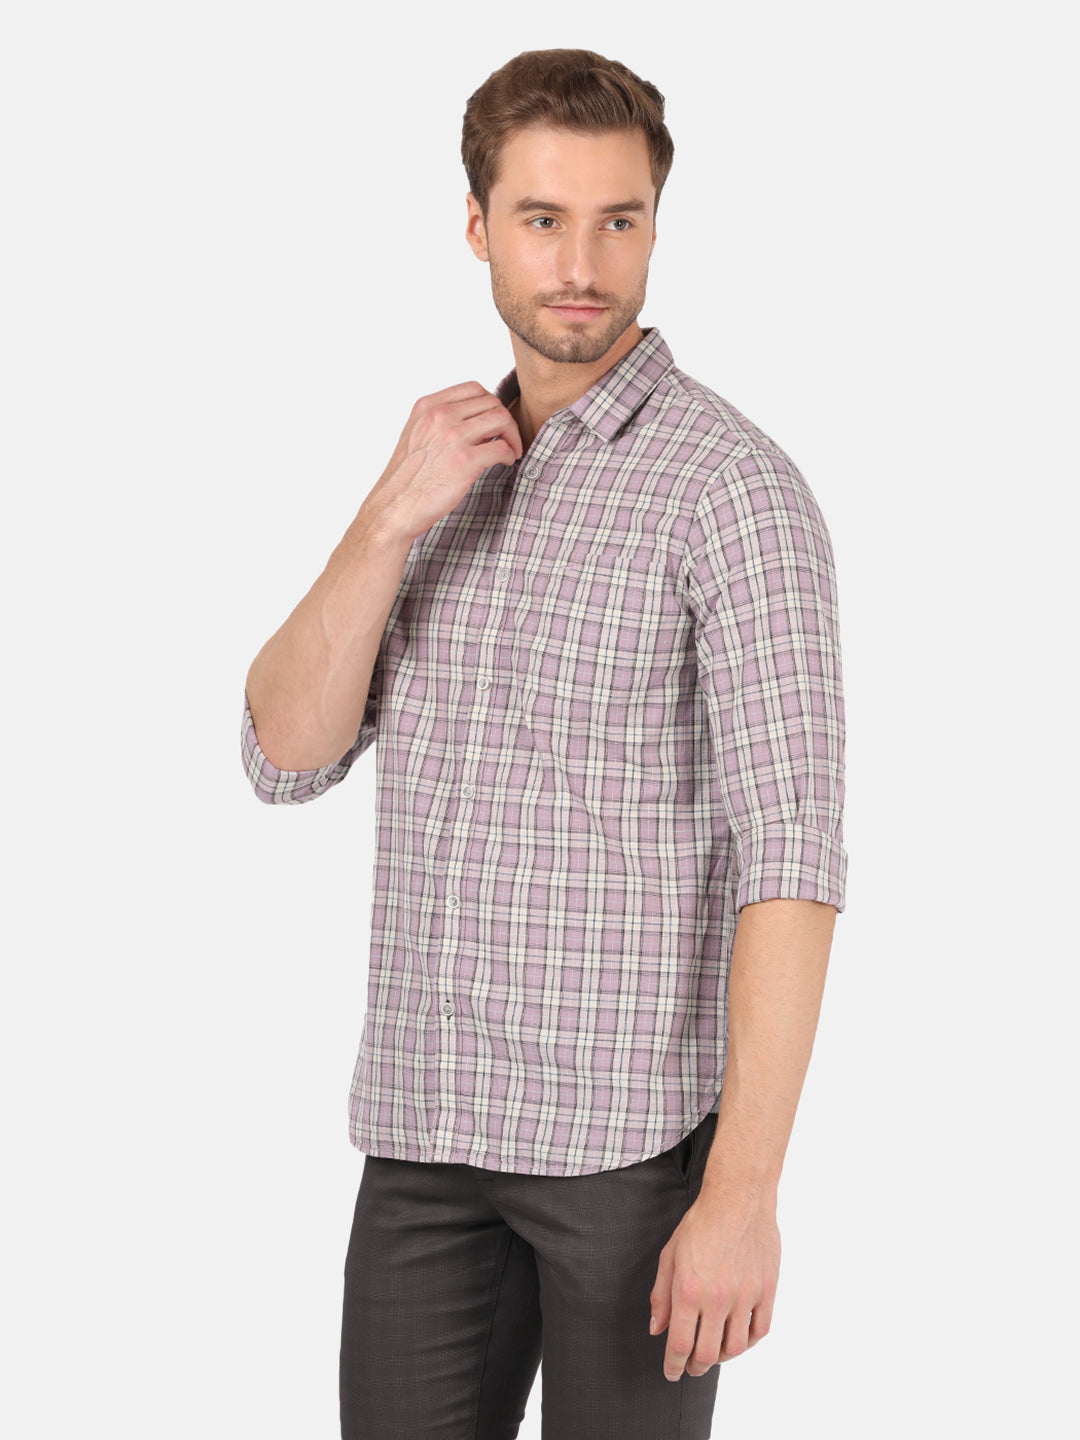 Casual Full Sleeve Comfort Fit Checks Purple with Collar Shirt for Men